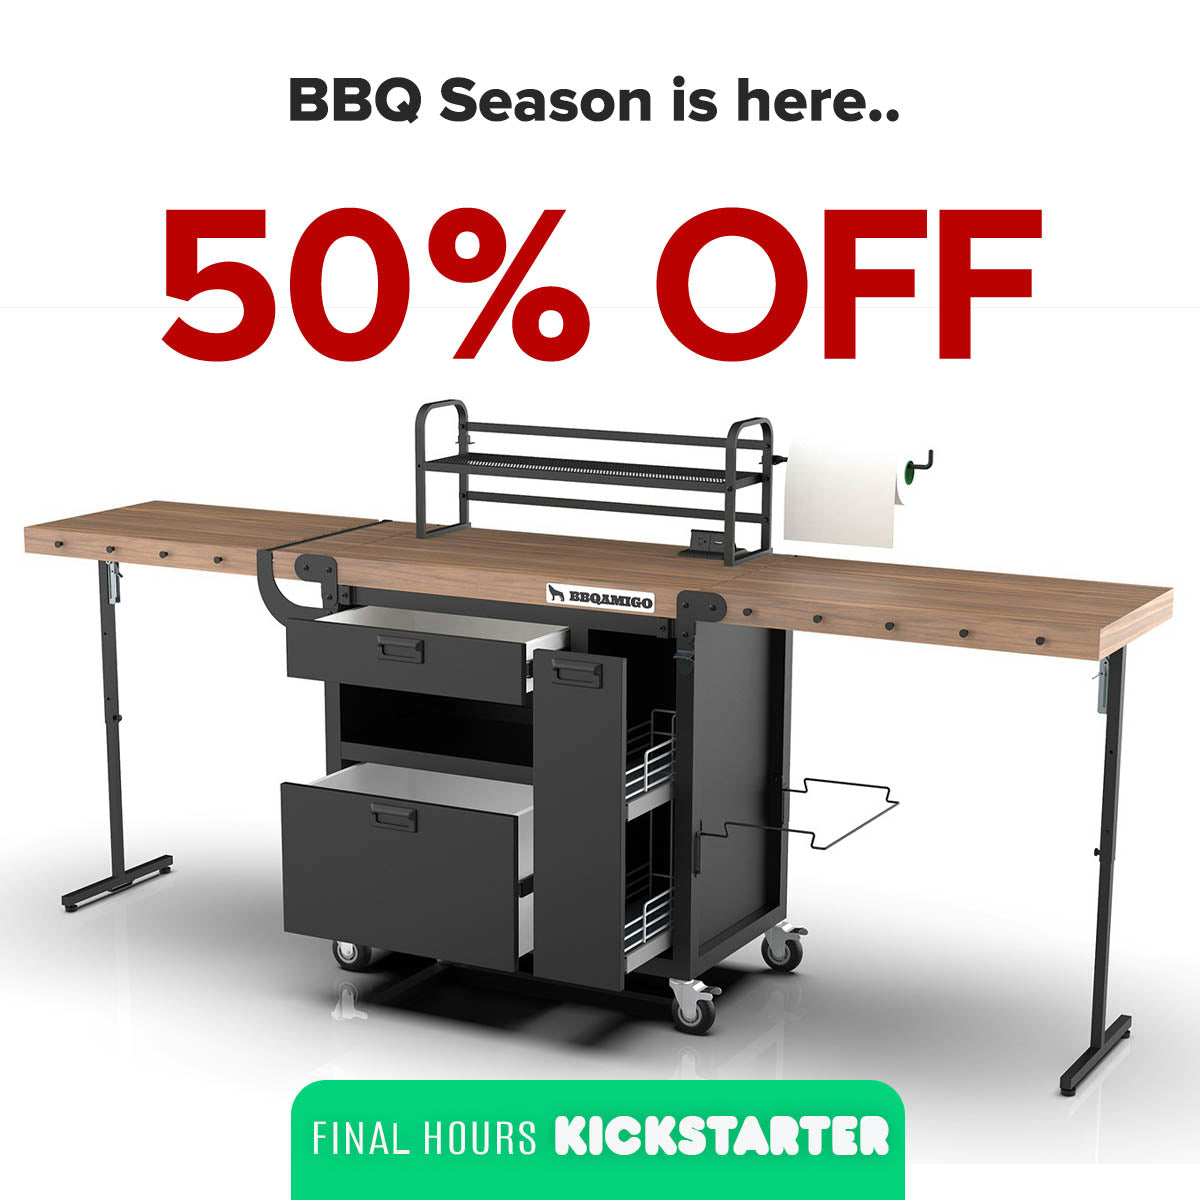 Example of a Discount Ad Image for Kickstarter